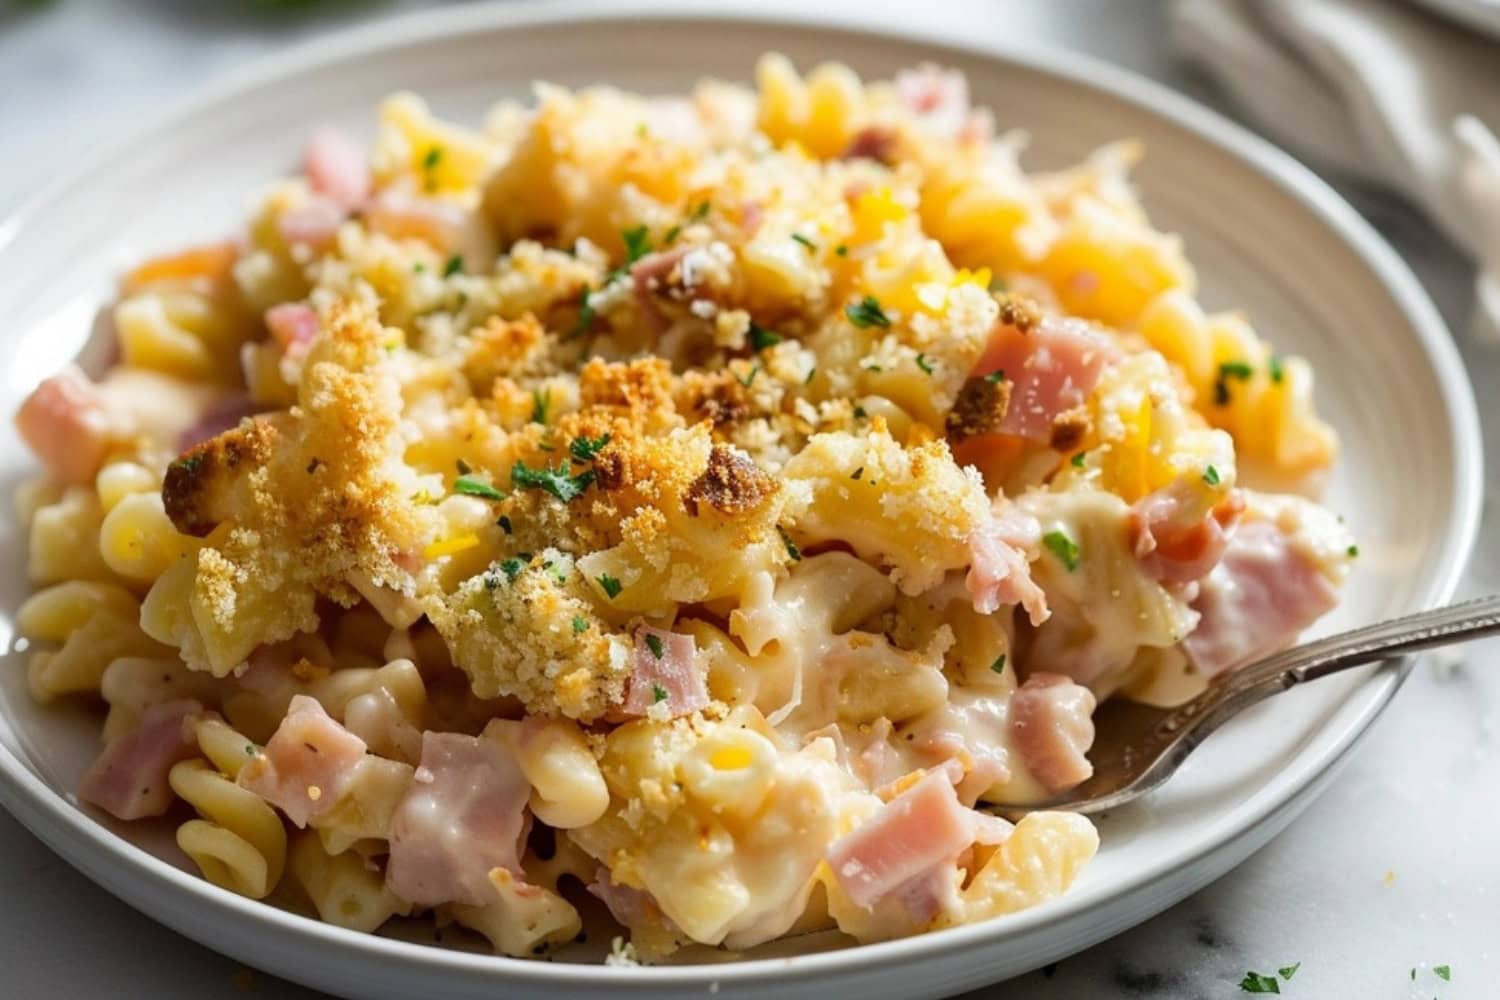 Ham and cheese casserole in a plate with spoon.